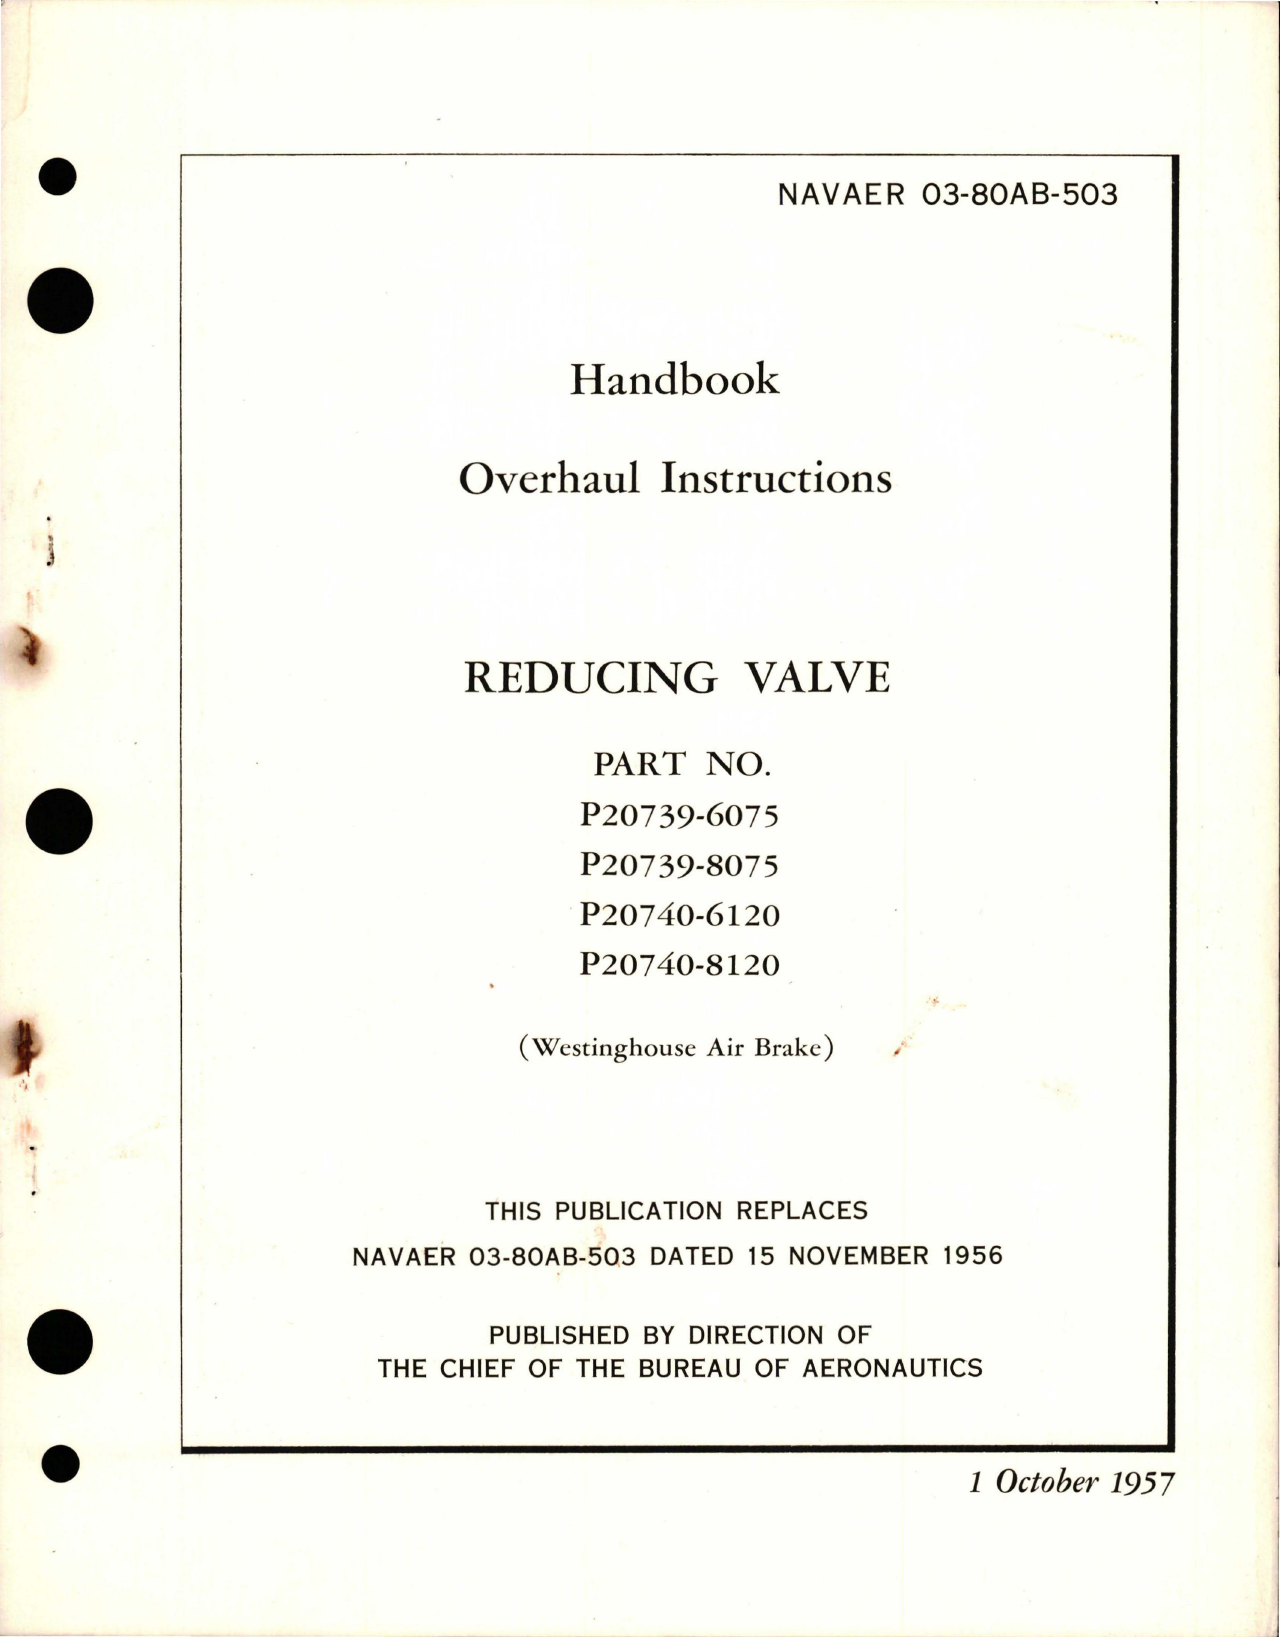 Sample page 1 from AirCorps Library document: Overhaul Instructions for Reducing Valve